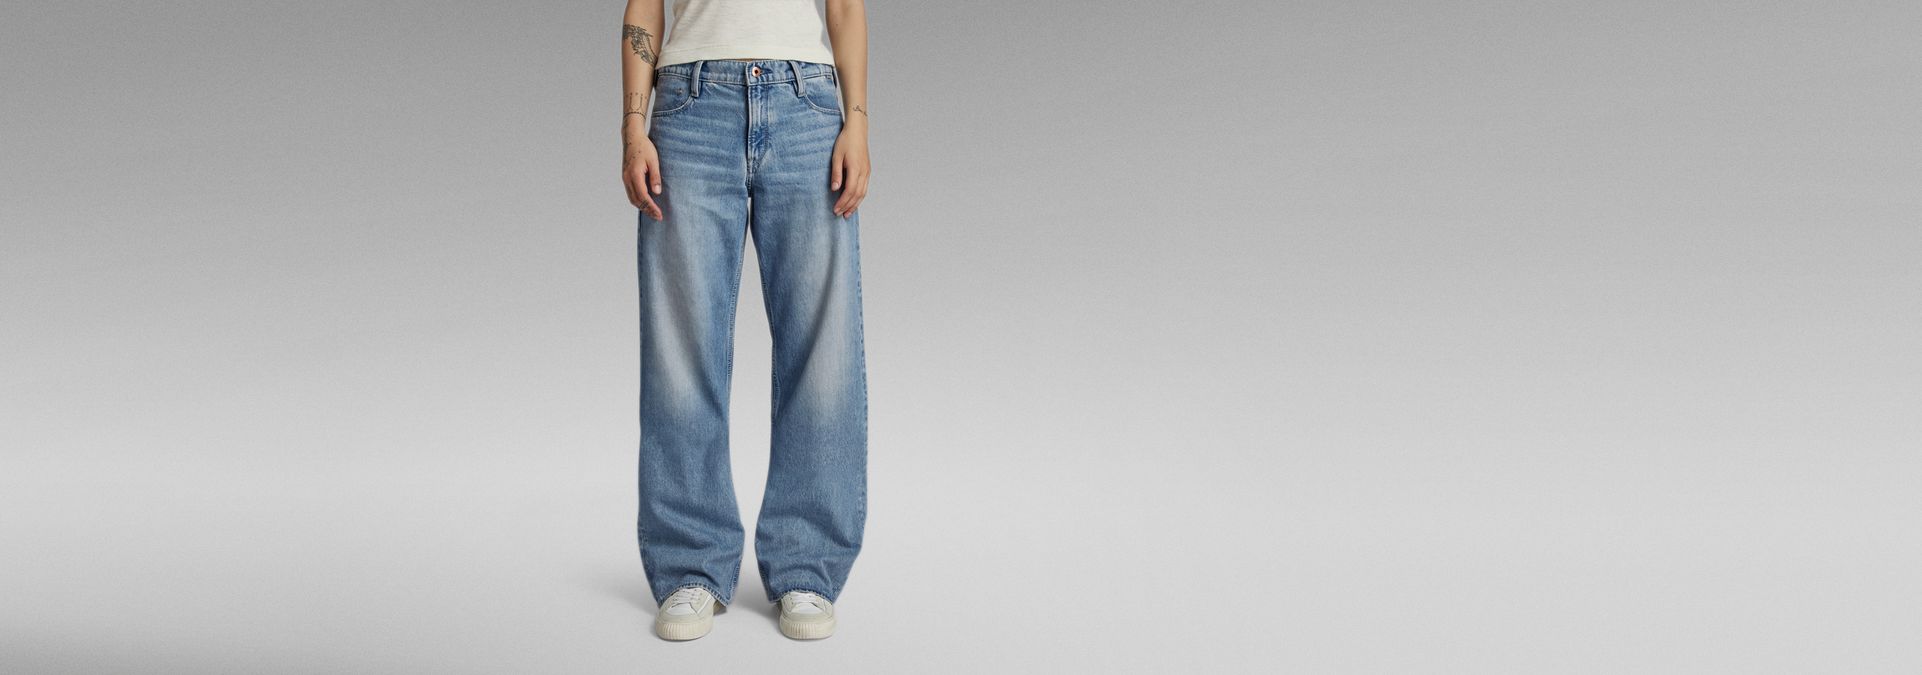 Is the Gap '90s Loose Jean The Perfect 2020's Jean for Grown-ass Women? -  Wardrobe Oxygen